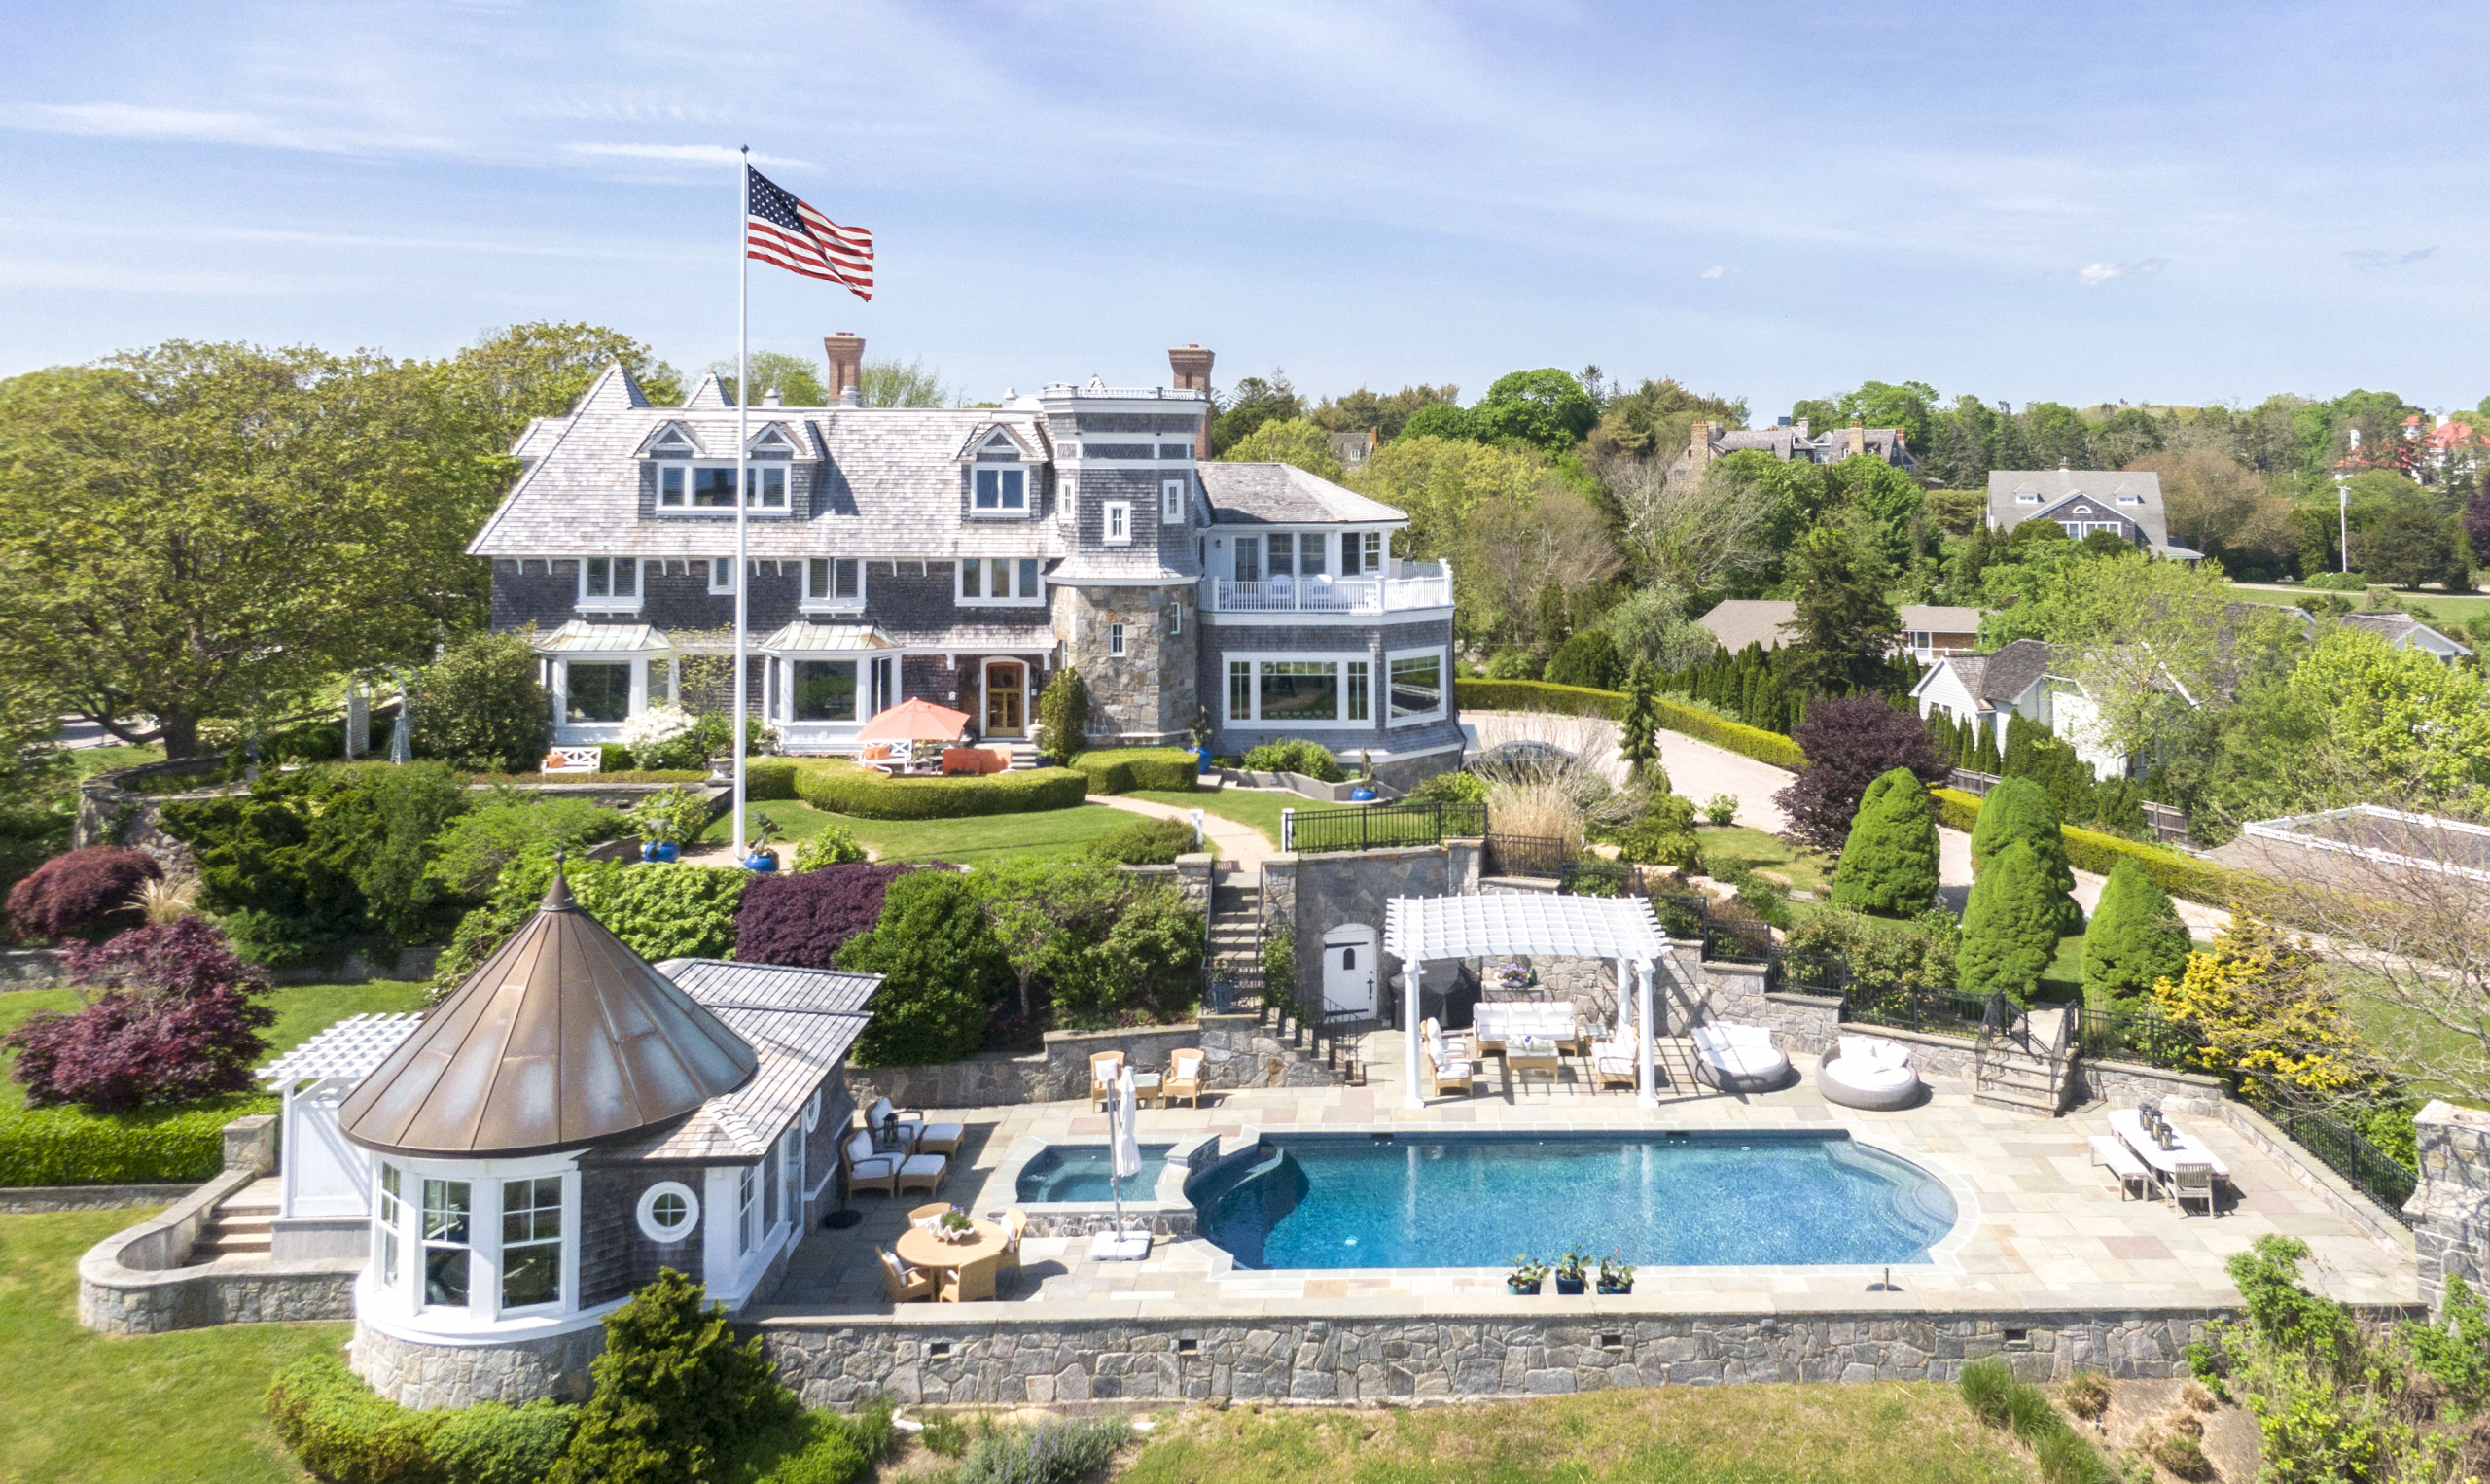 HOUSE OF THE WEEK: WATCH HILL WATERFRONT ESTATE LISTED FOR $18.5 MILLION